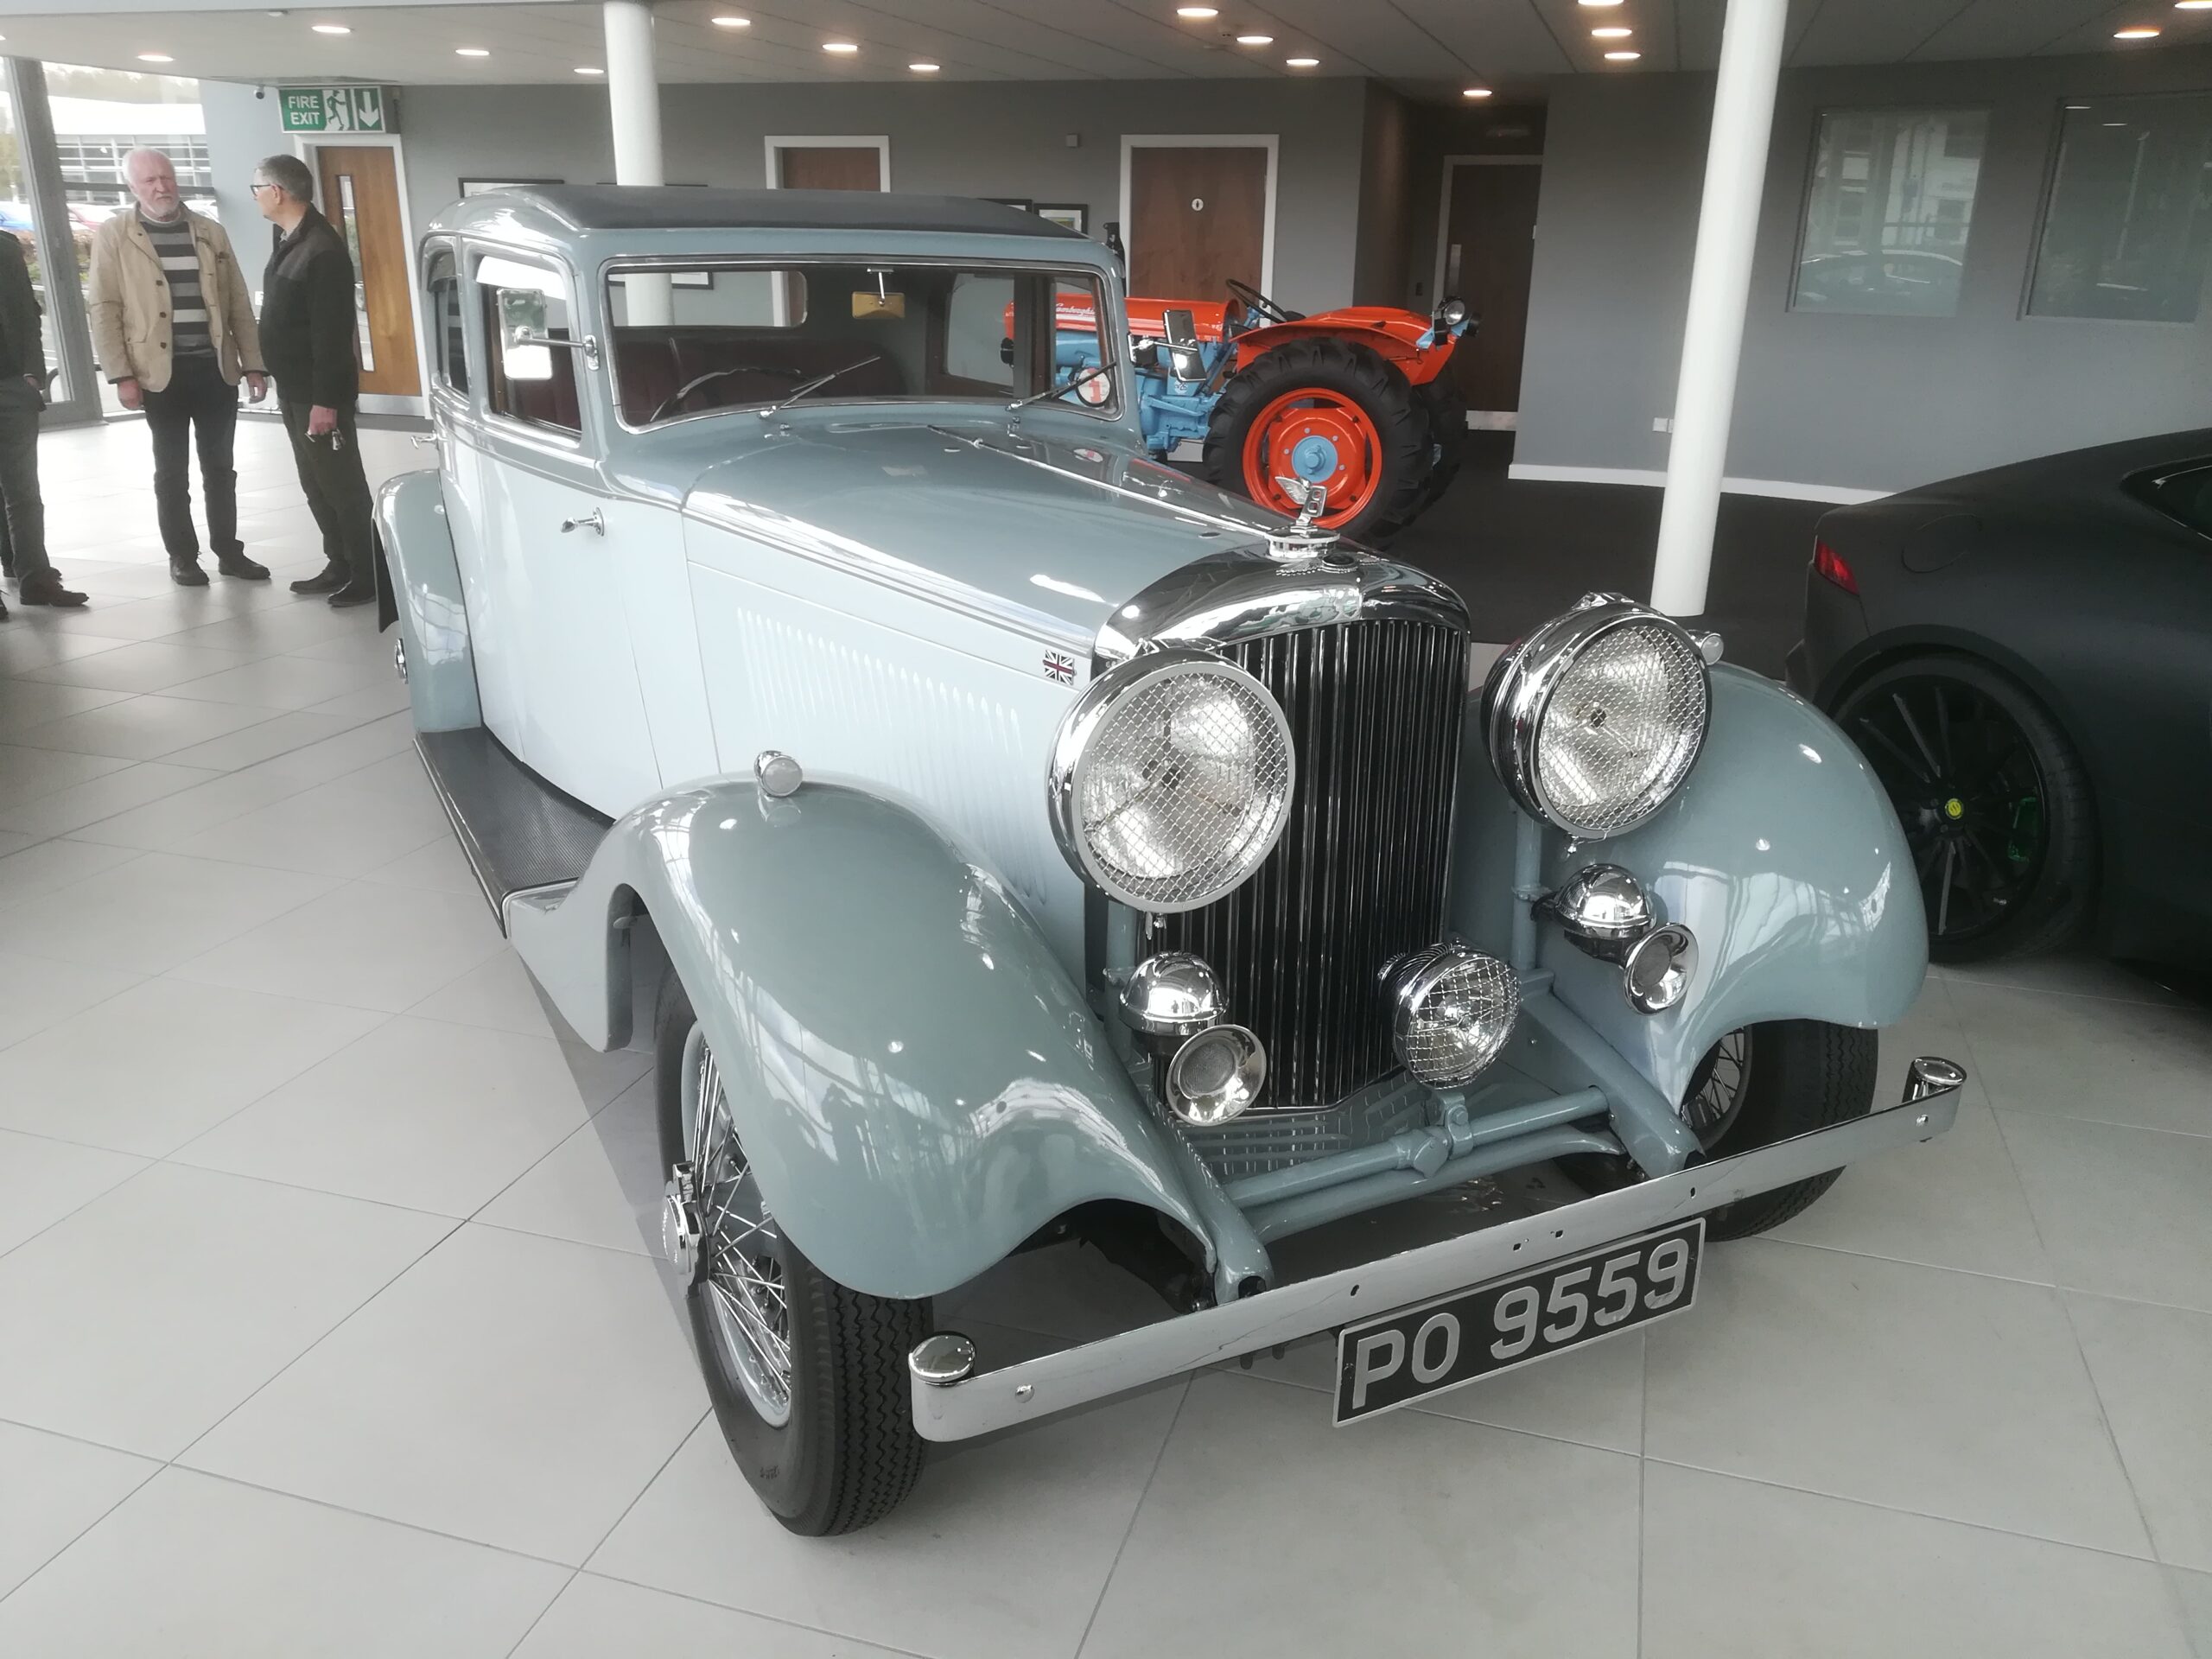 Preston and District Vintage Car Club is bringing 15 historic vehicles to the first Southport Classic and Speed event at Victoria Park in Southport on Sunday, 10th October, 2021. A Derby Bentley